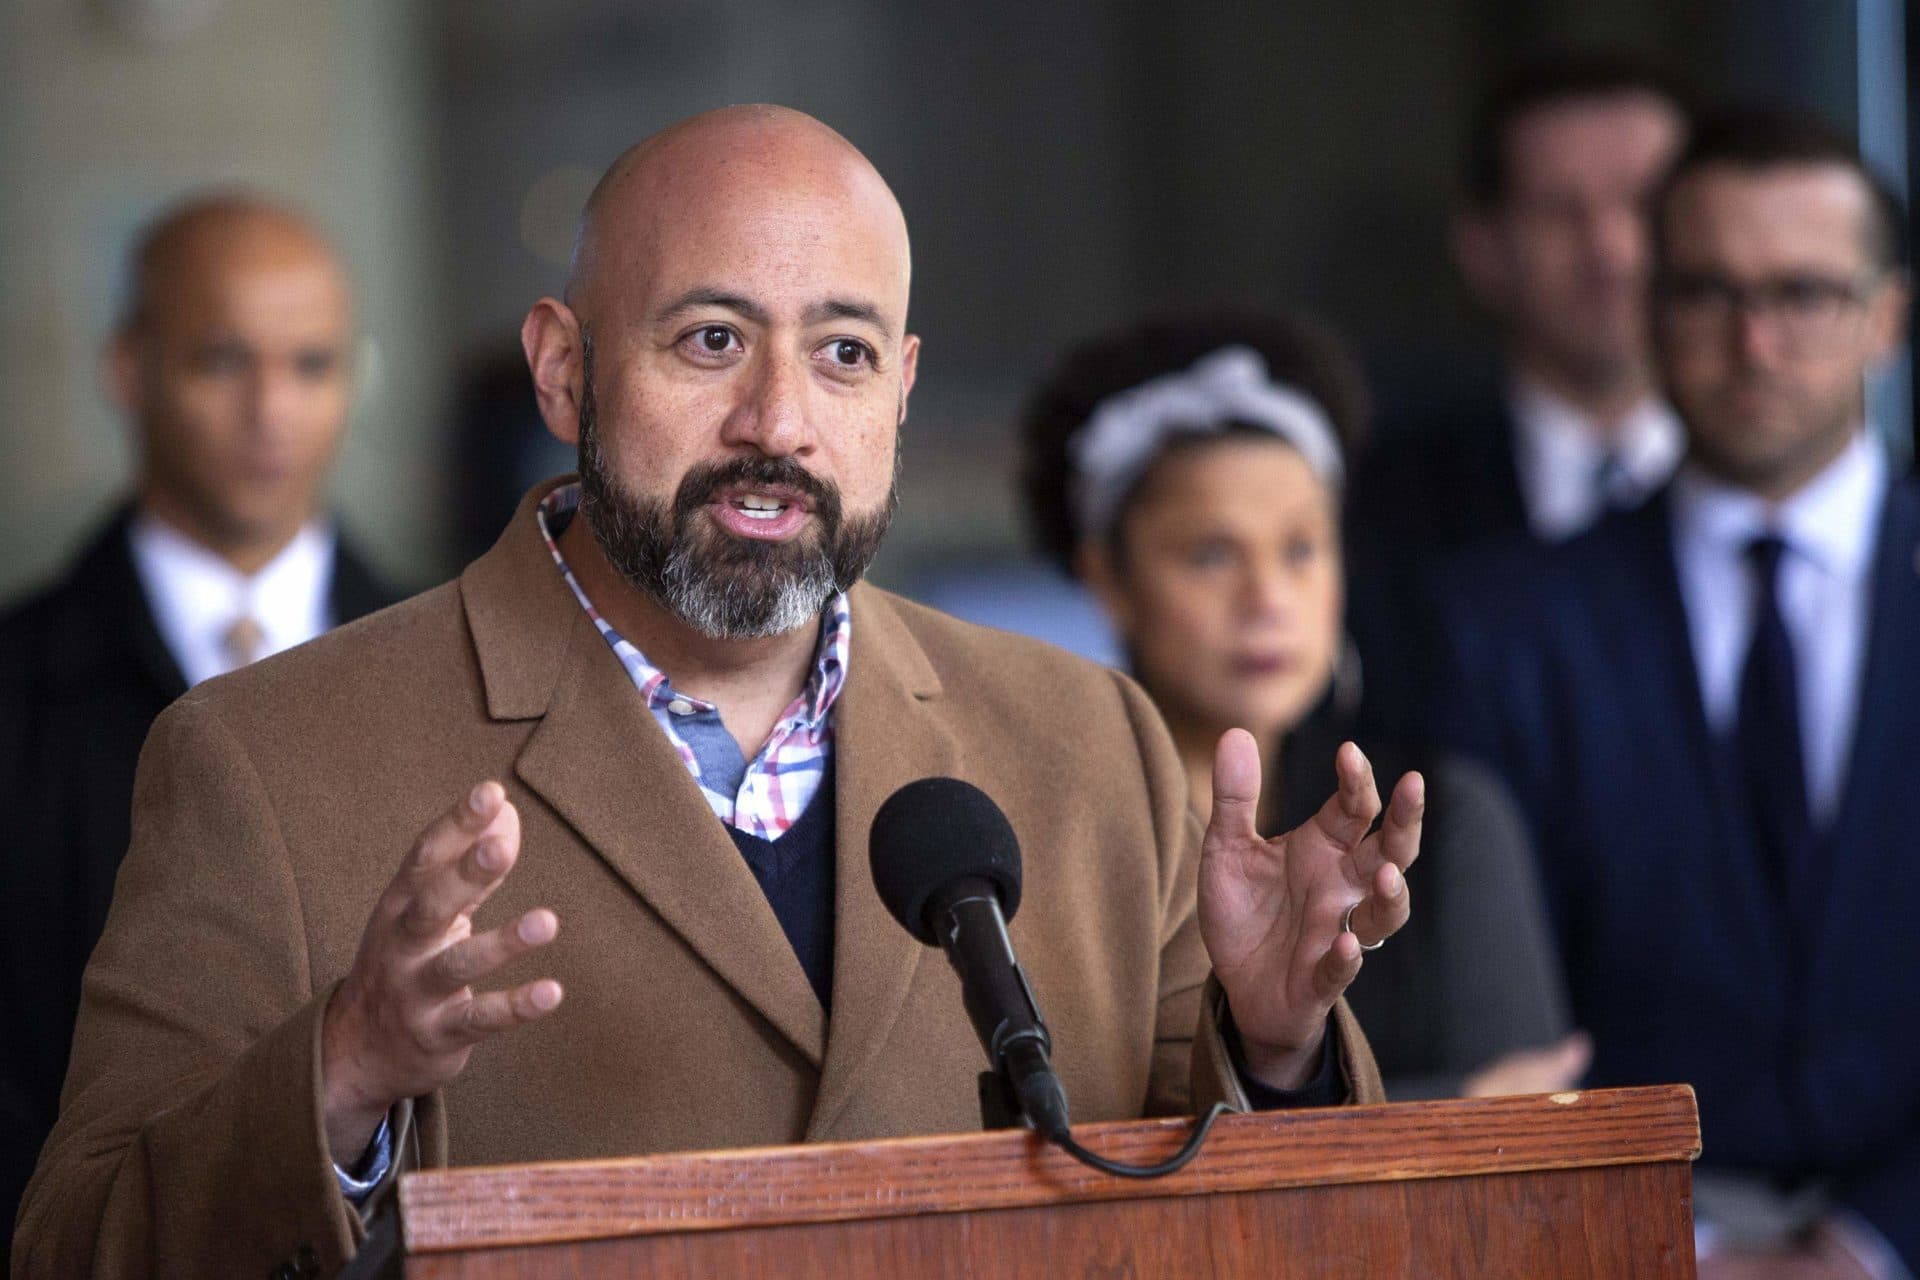 In this file photo, Marty Martinez, chief of the Mayor's Office Health and Human Services for the city of Boston, speaks in front of City Hall on March 16, 2020. (Robin Lubbock/WBUR)